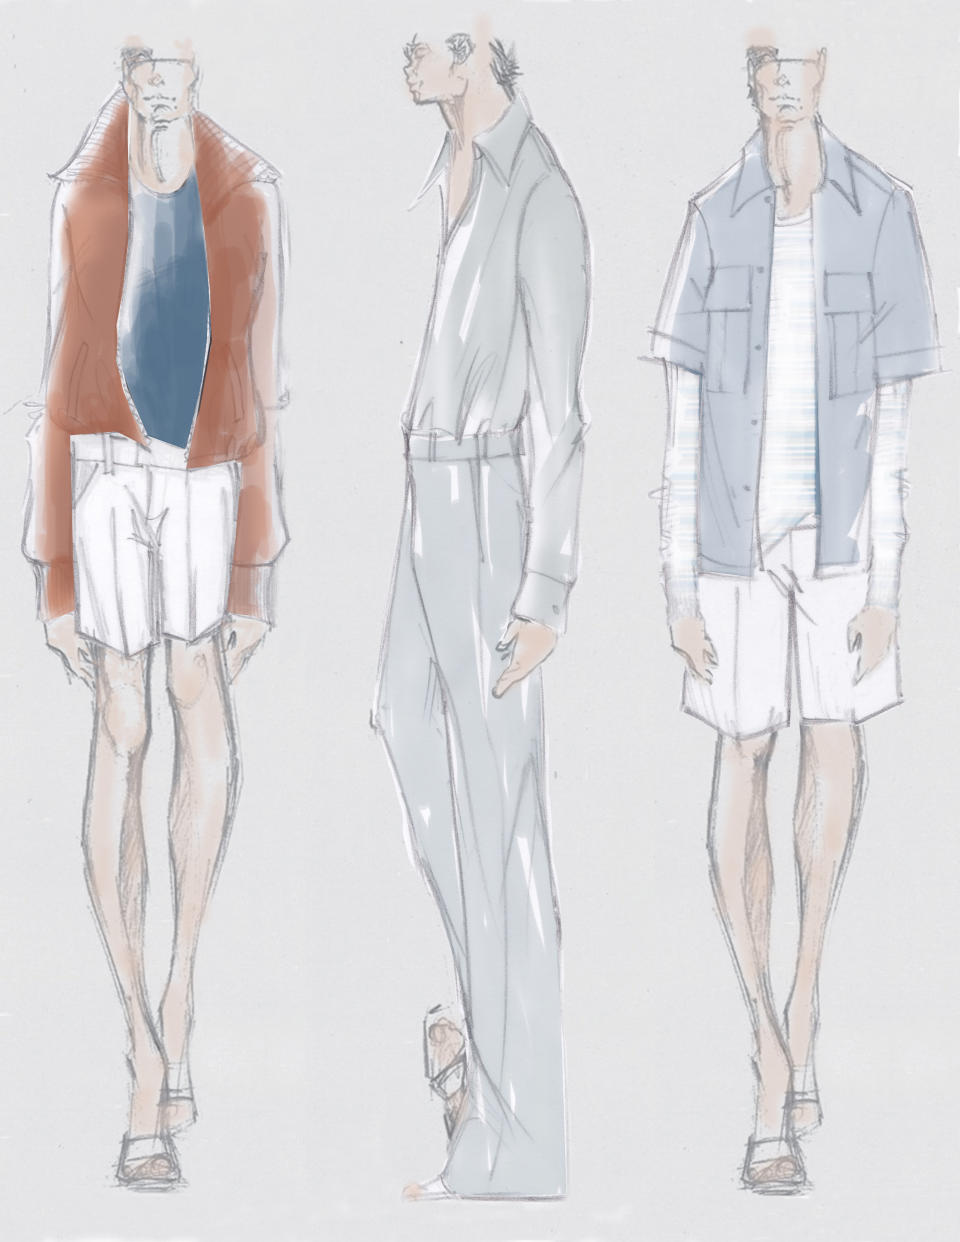 A sneak peek at the spring 2023 collection for Bugatchi, designed by Keegan.